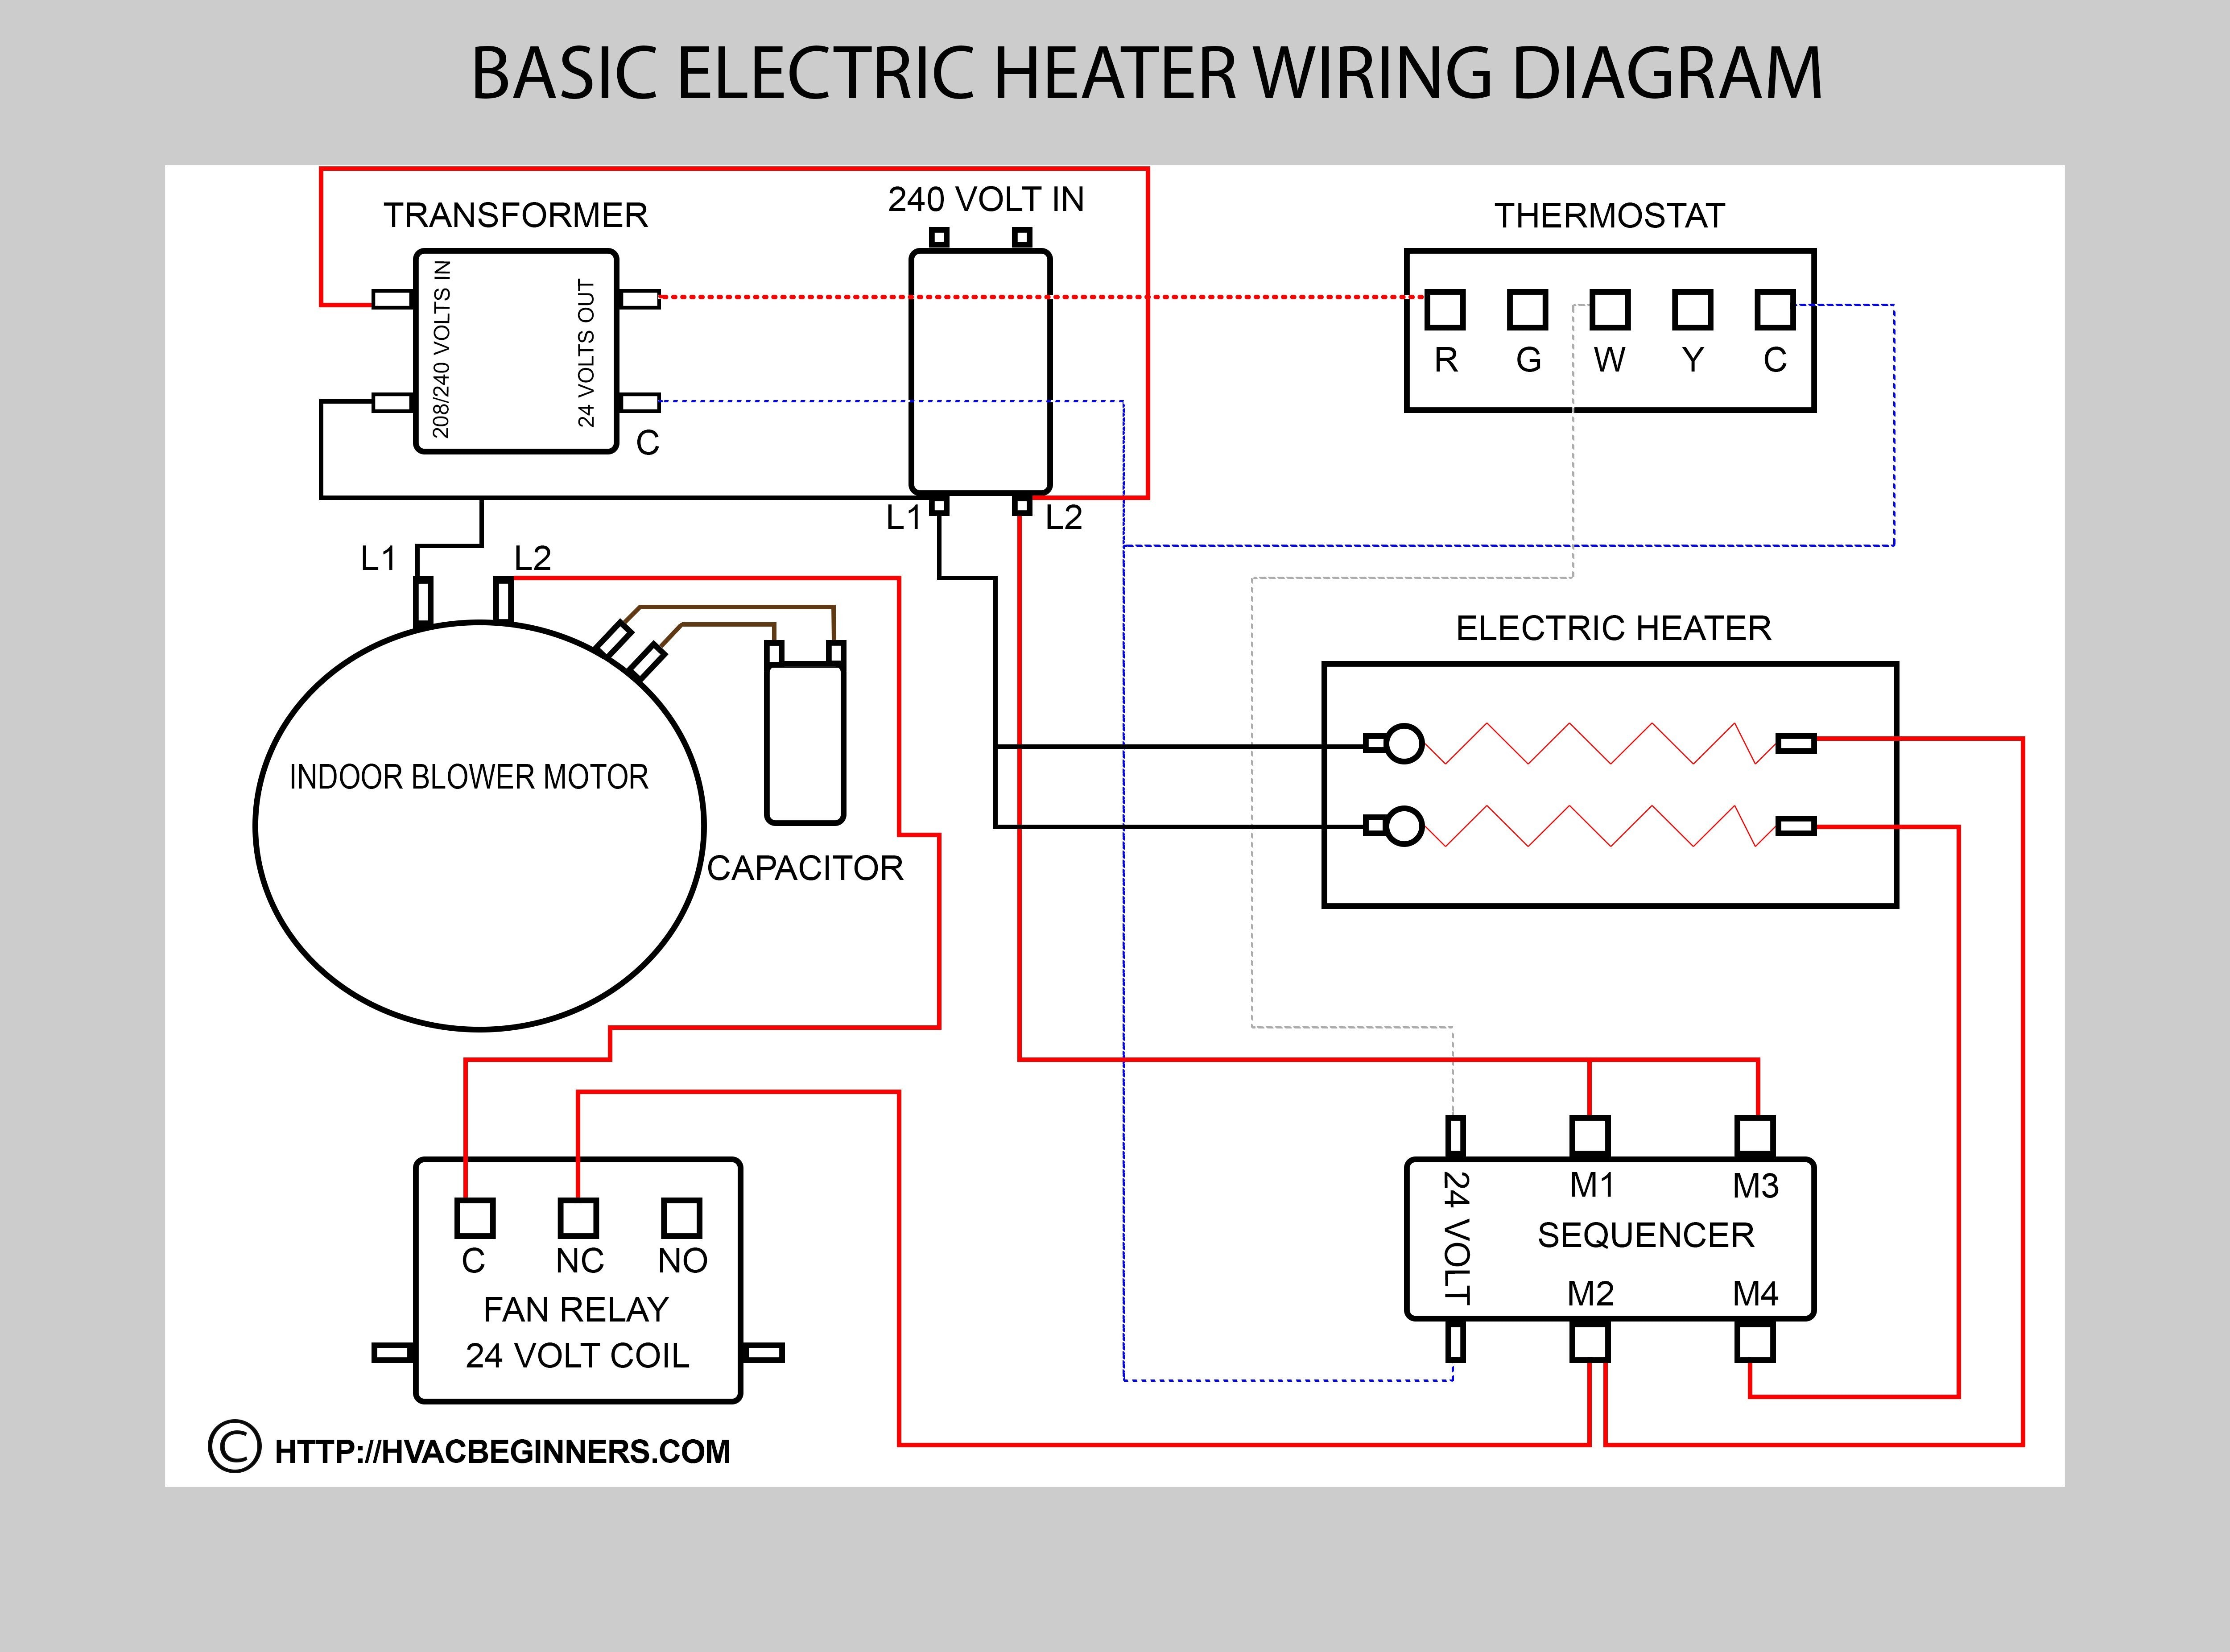 central ac wiring diagram electrical wiring diagram house u2022 rh universalservices co central air conditioner wiring